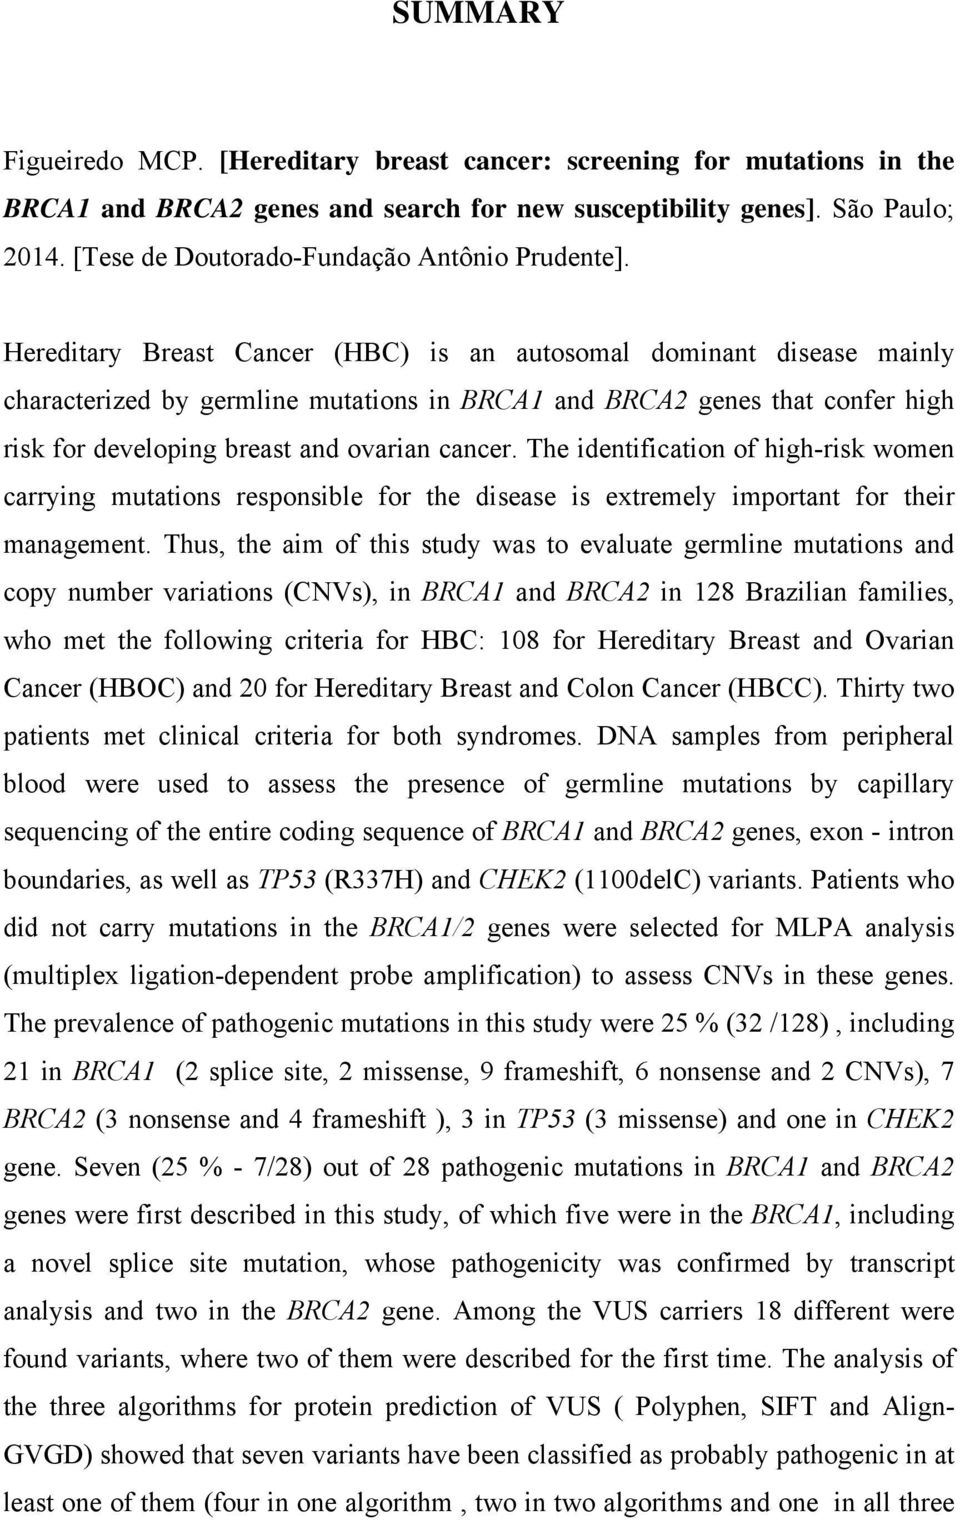 Hereditary Breast Cancer (HBC) is an autosomal dominant disease mainly characterized by germline mutations in BRCA1 and BRCA2 genes that confer high risk for developing breast and ovarian cancer.